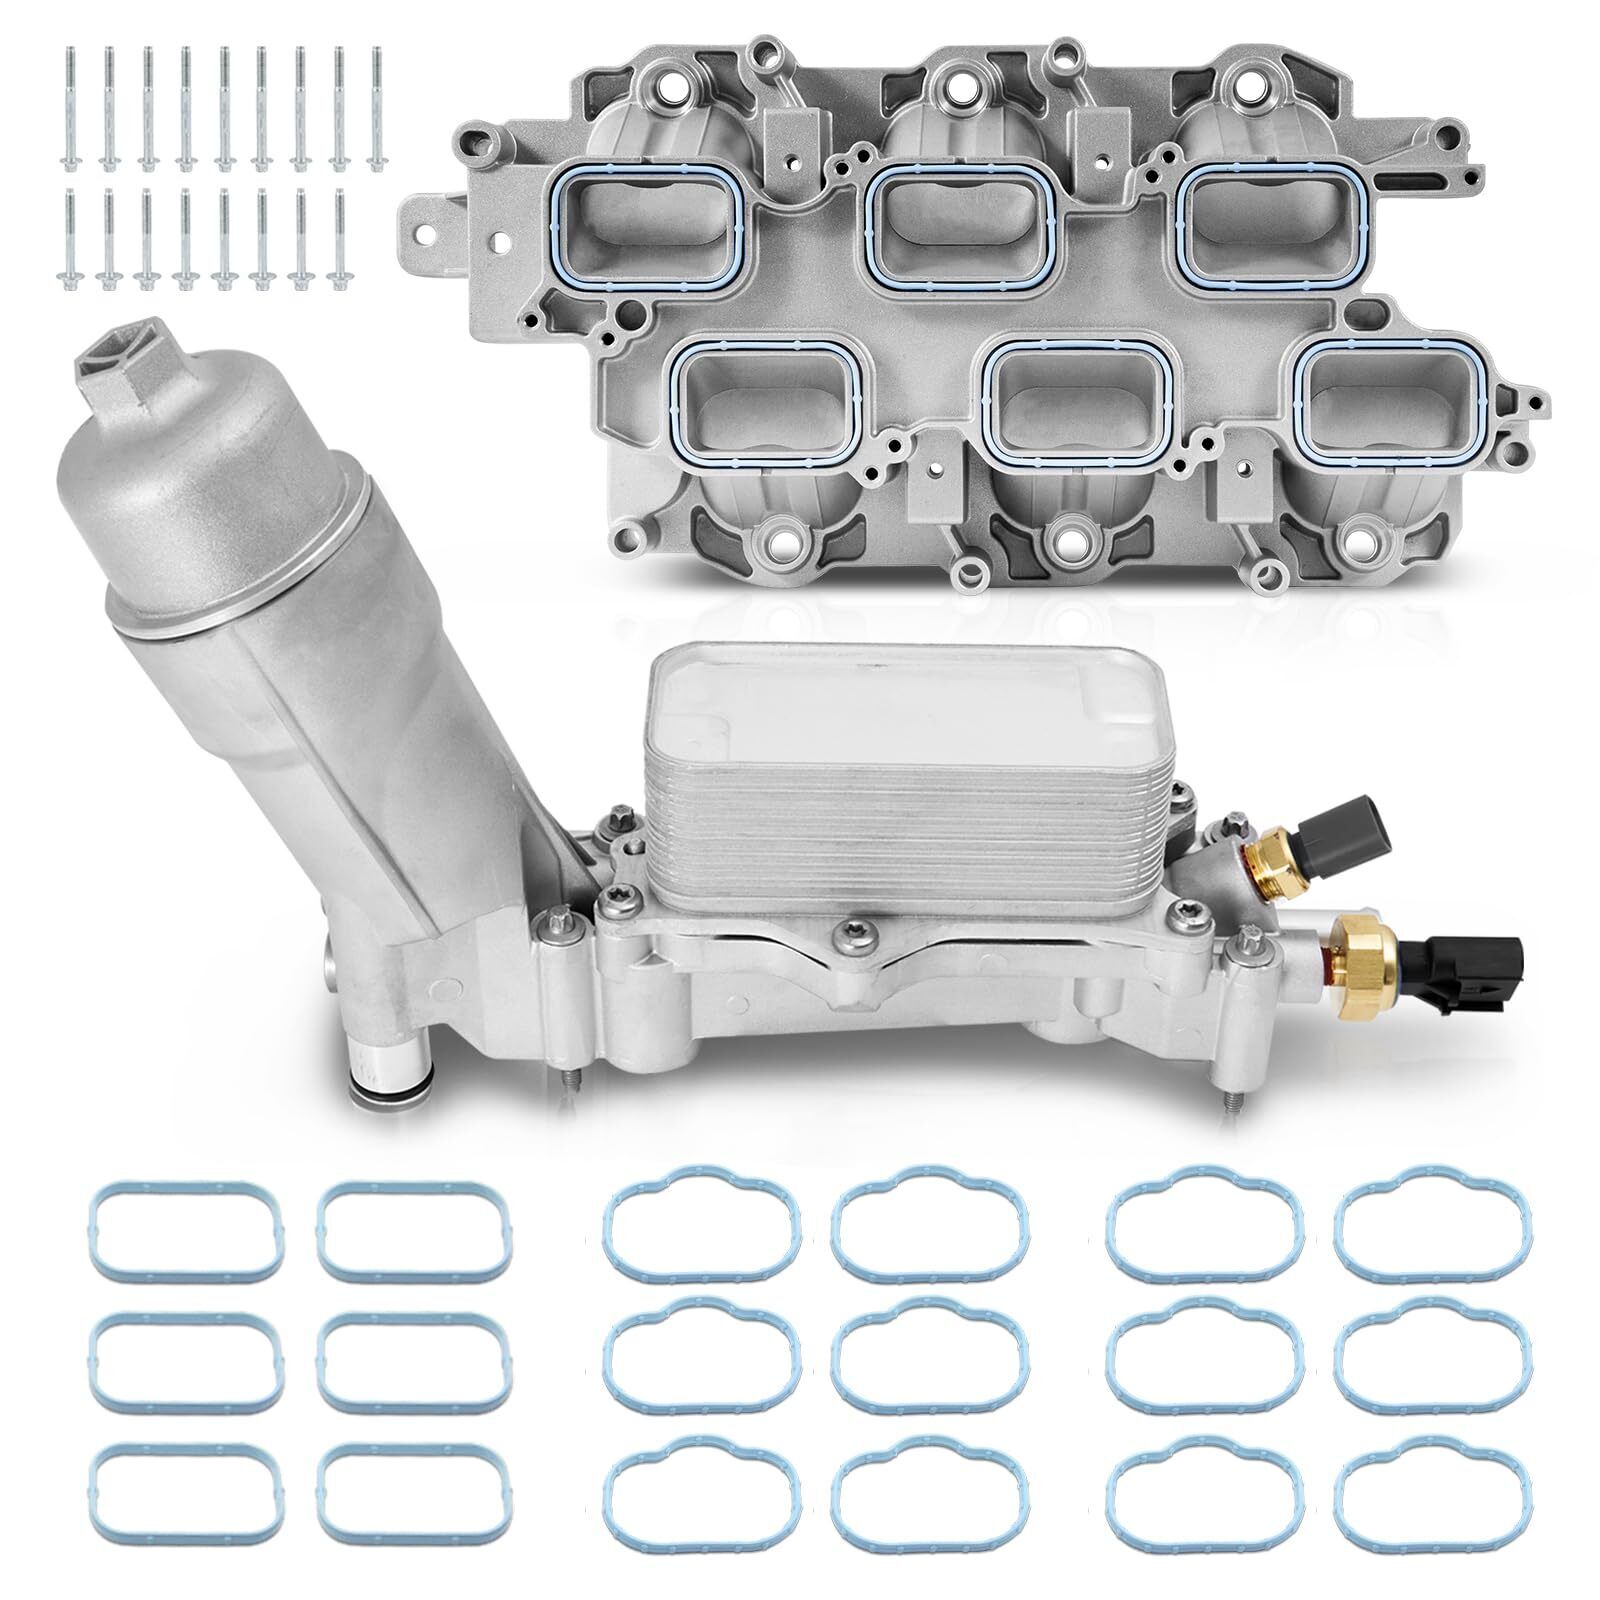 Full Aluminum Intake Manifold with Oil Filter Housing For 11-16 Jeep Dodge Ram